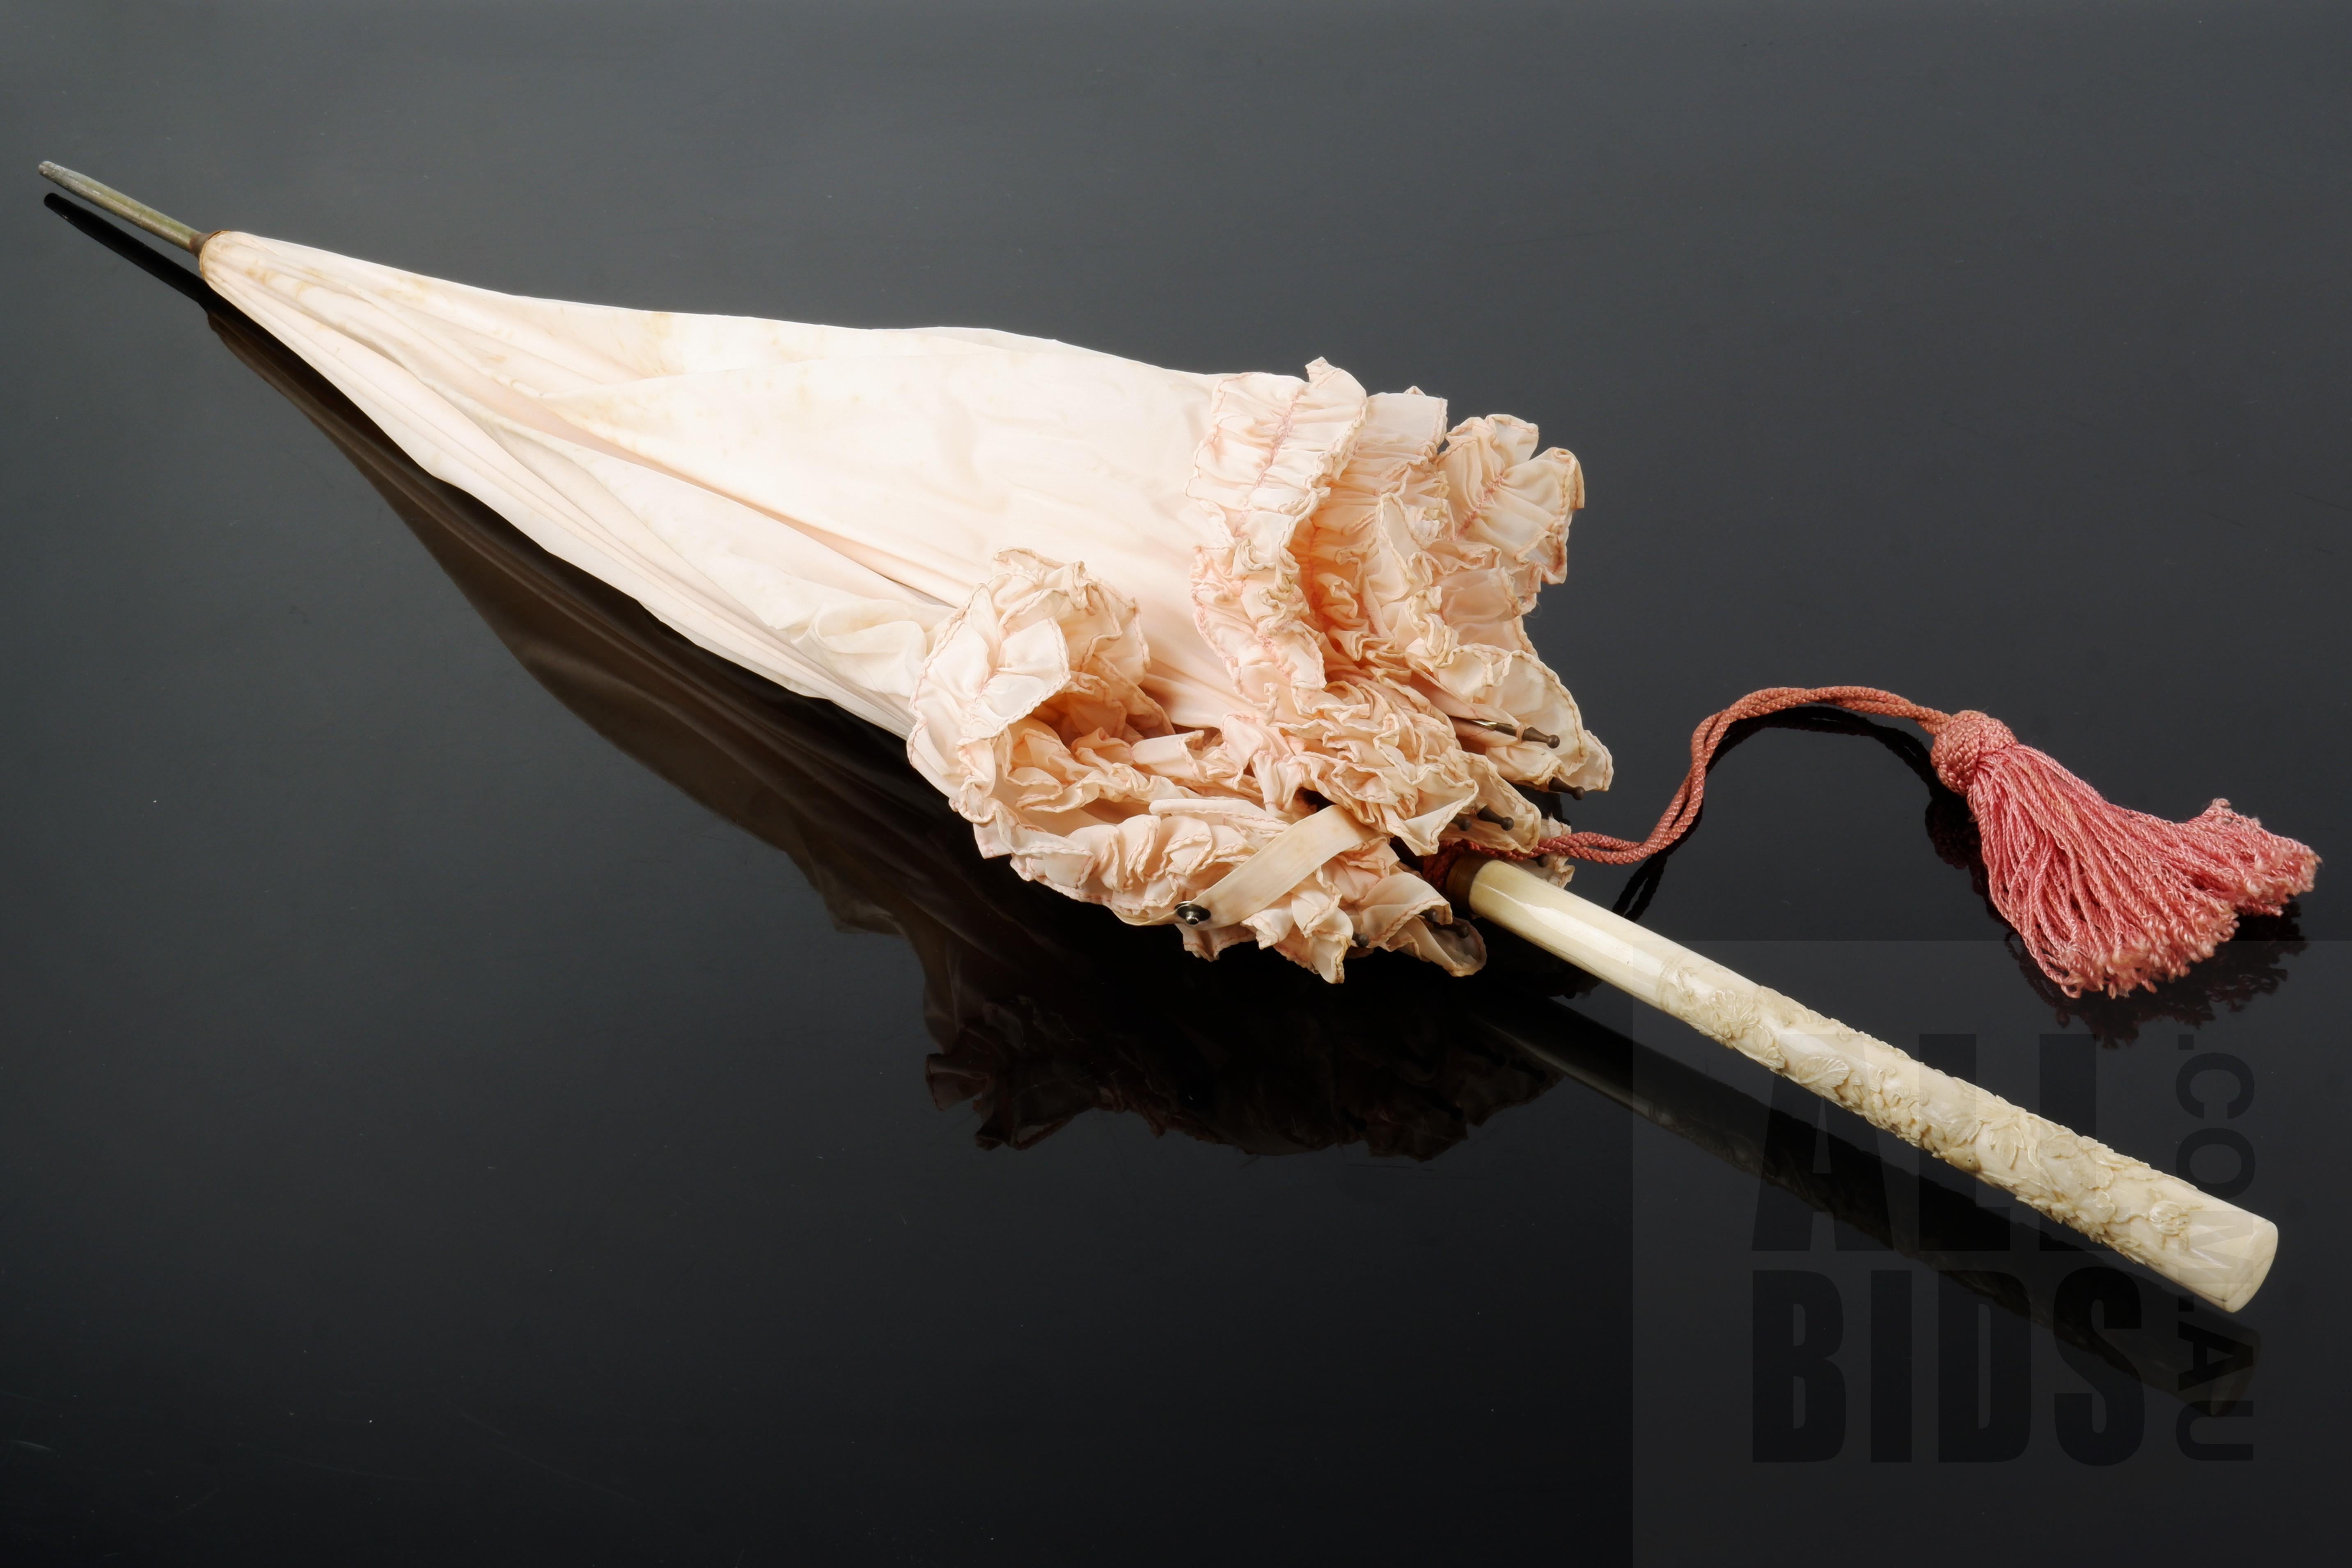 'Antique Parasol with Signed Japanese Carved Ivory Handle Circa 1900, the Later Replaced Fabric Lining with Some Stains'